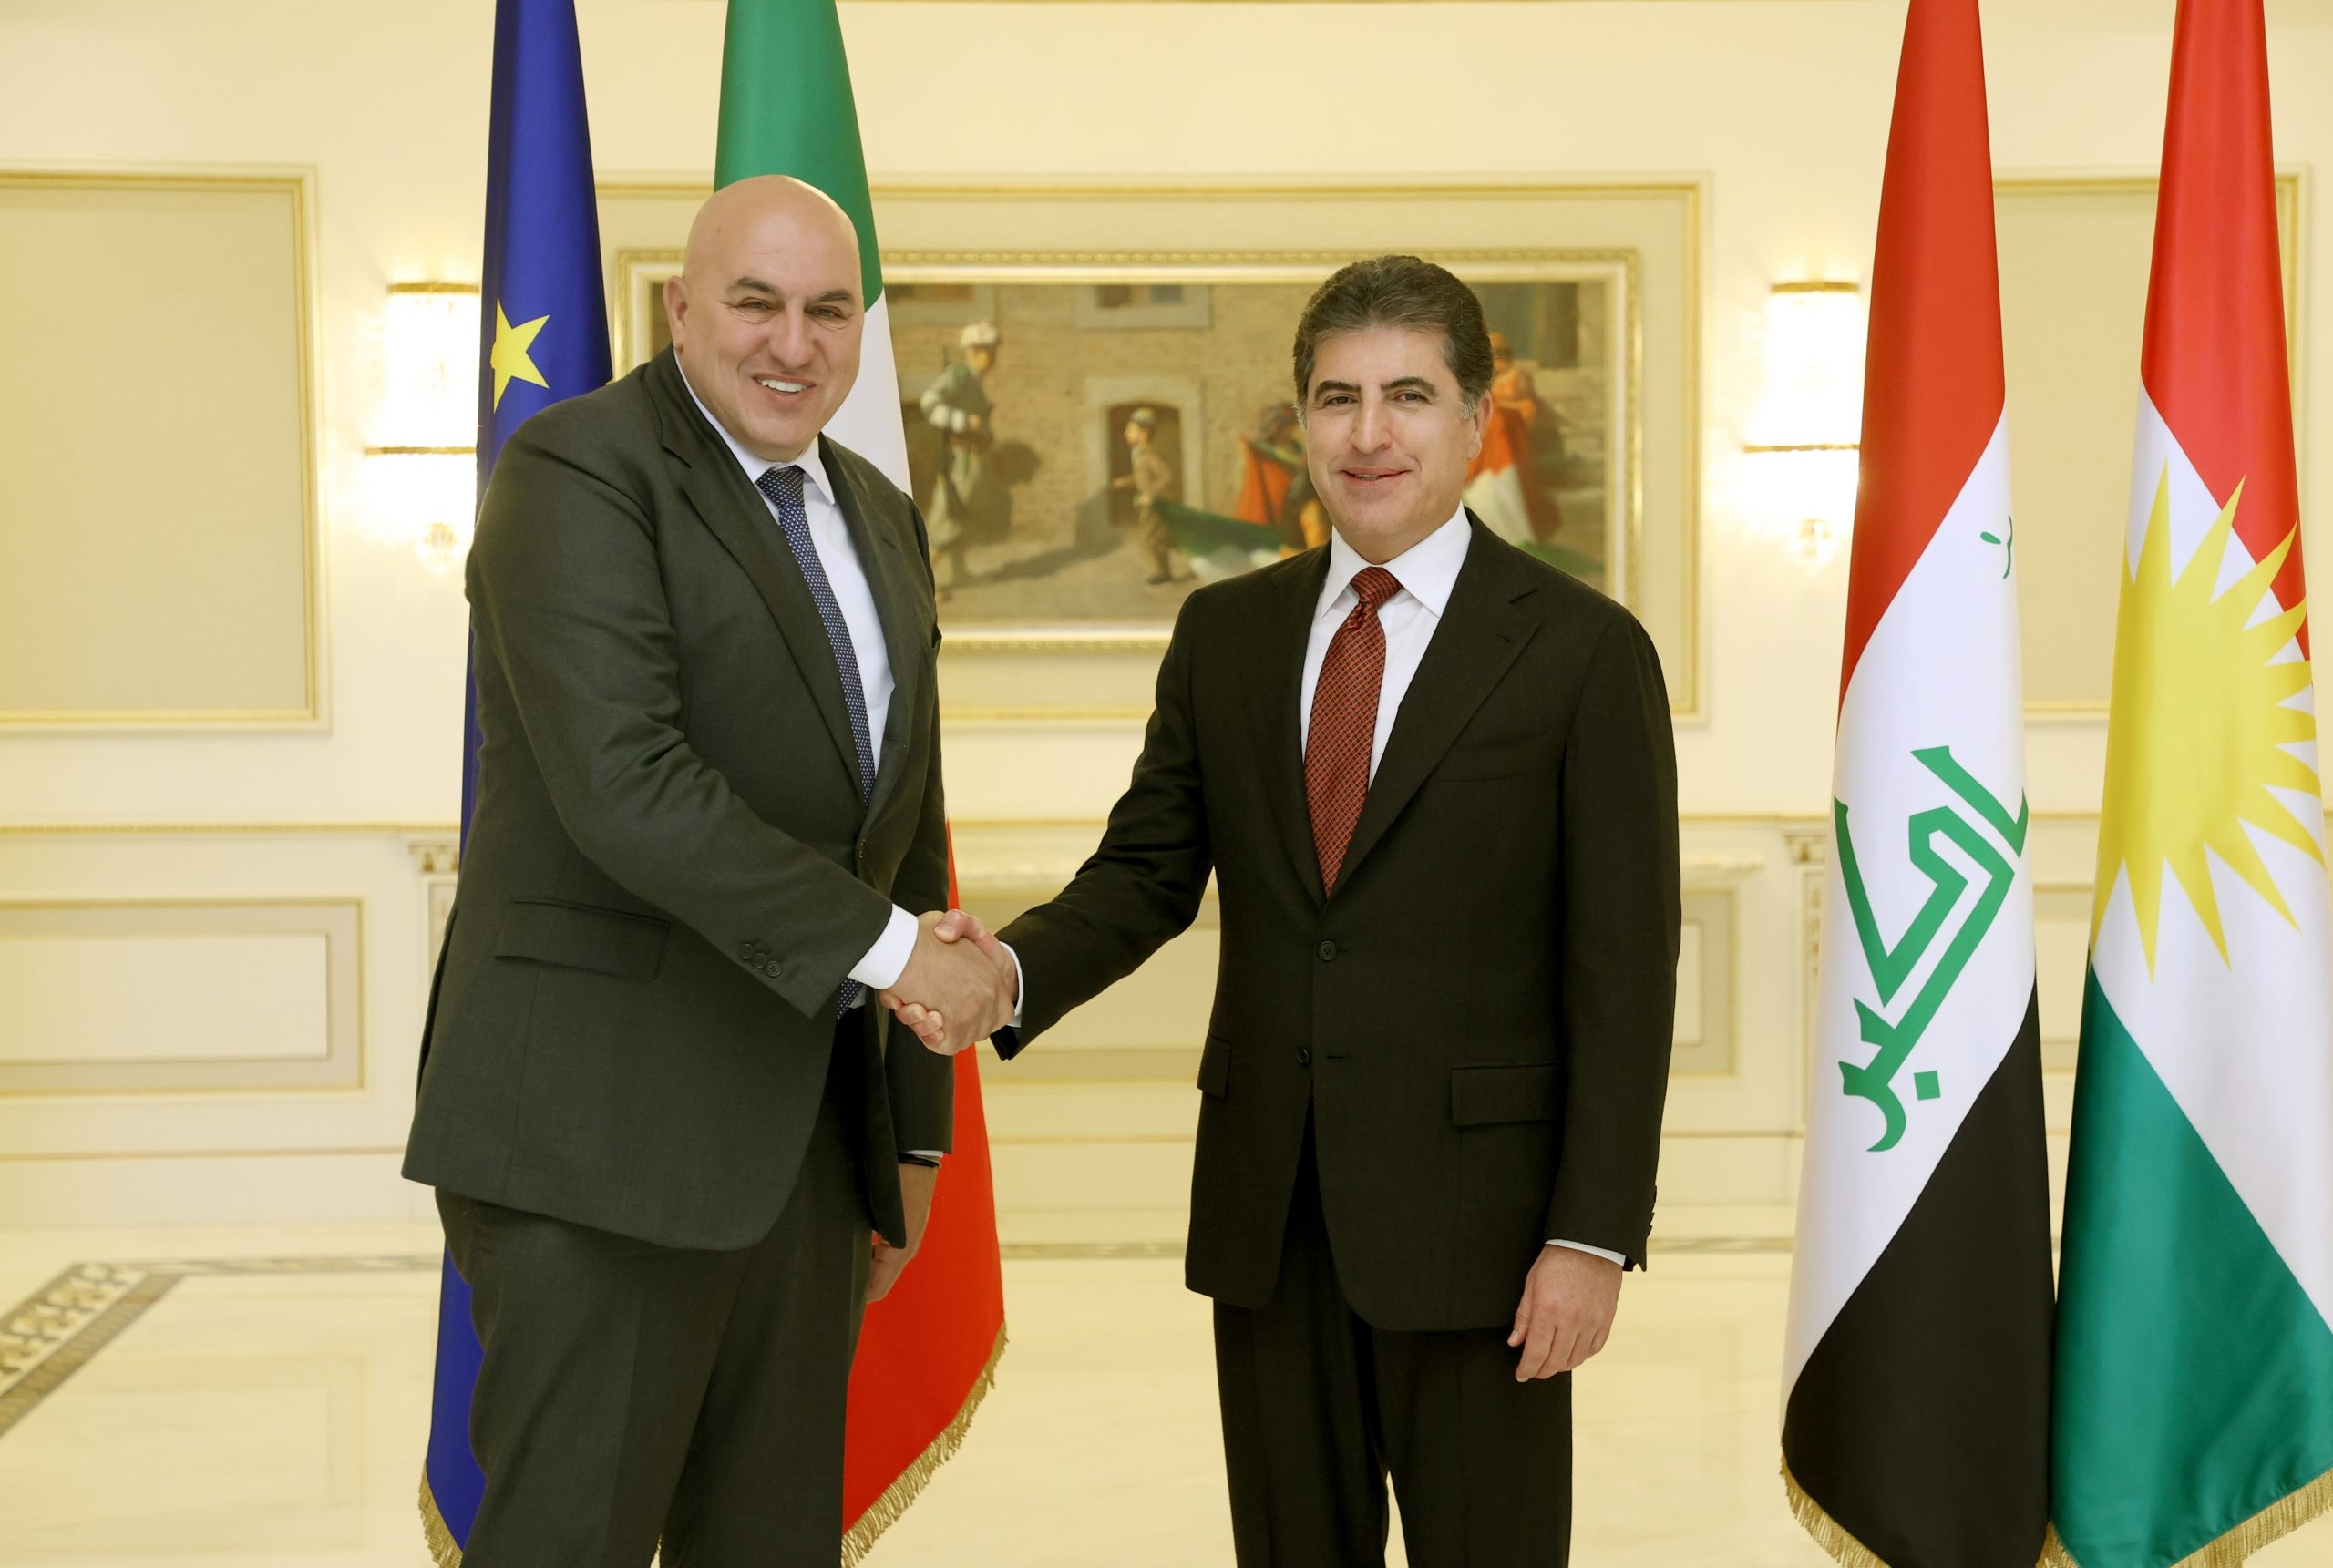 President Nechirvan Barzani and Italian Defense Minister Hold Productive Talks on Strengthening Ties and Promoting Stability in the Region